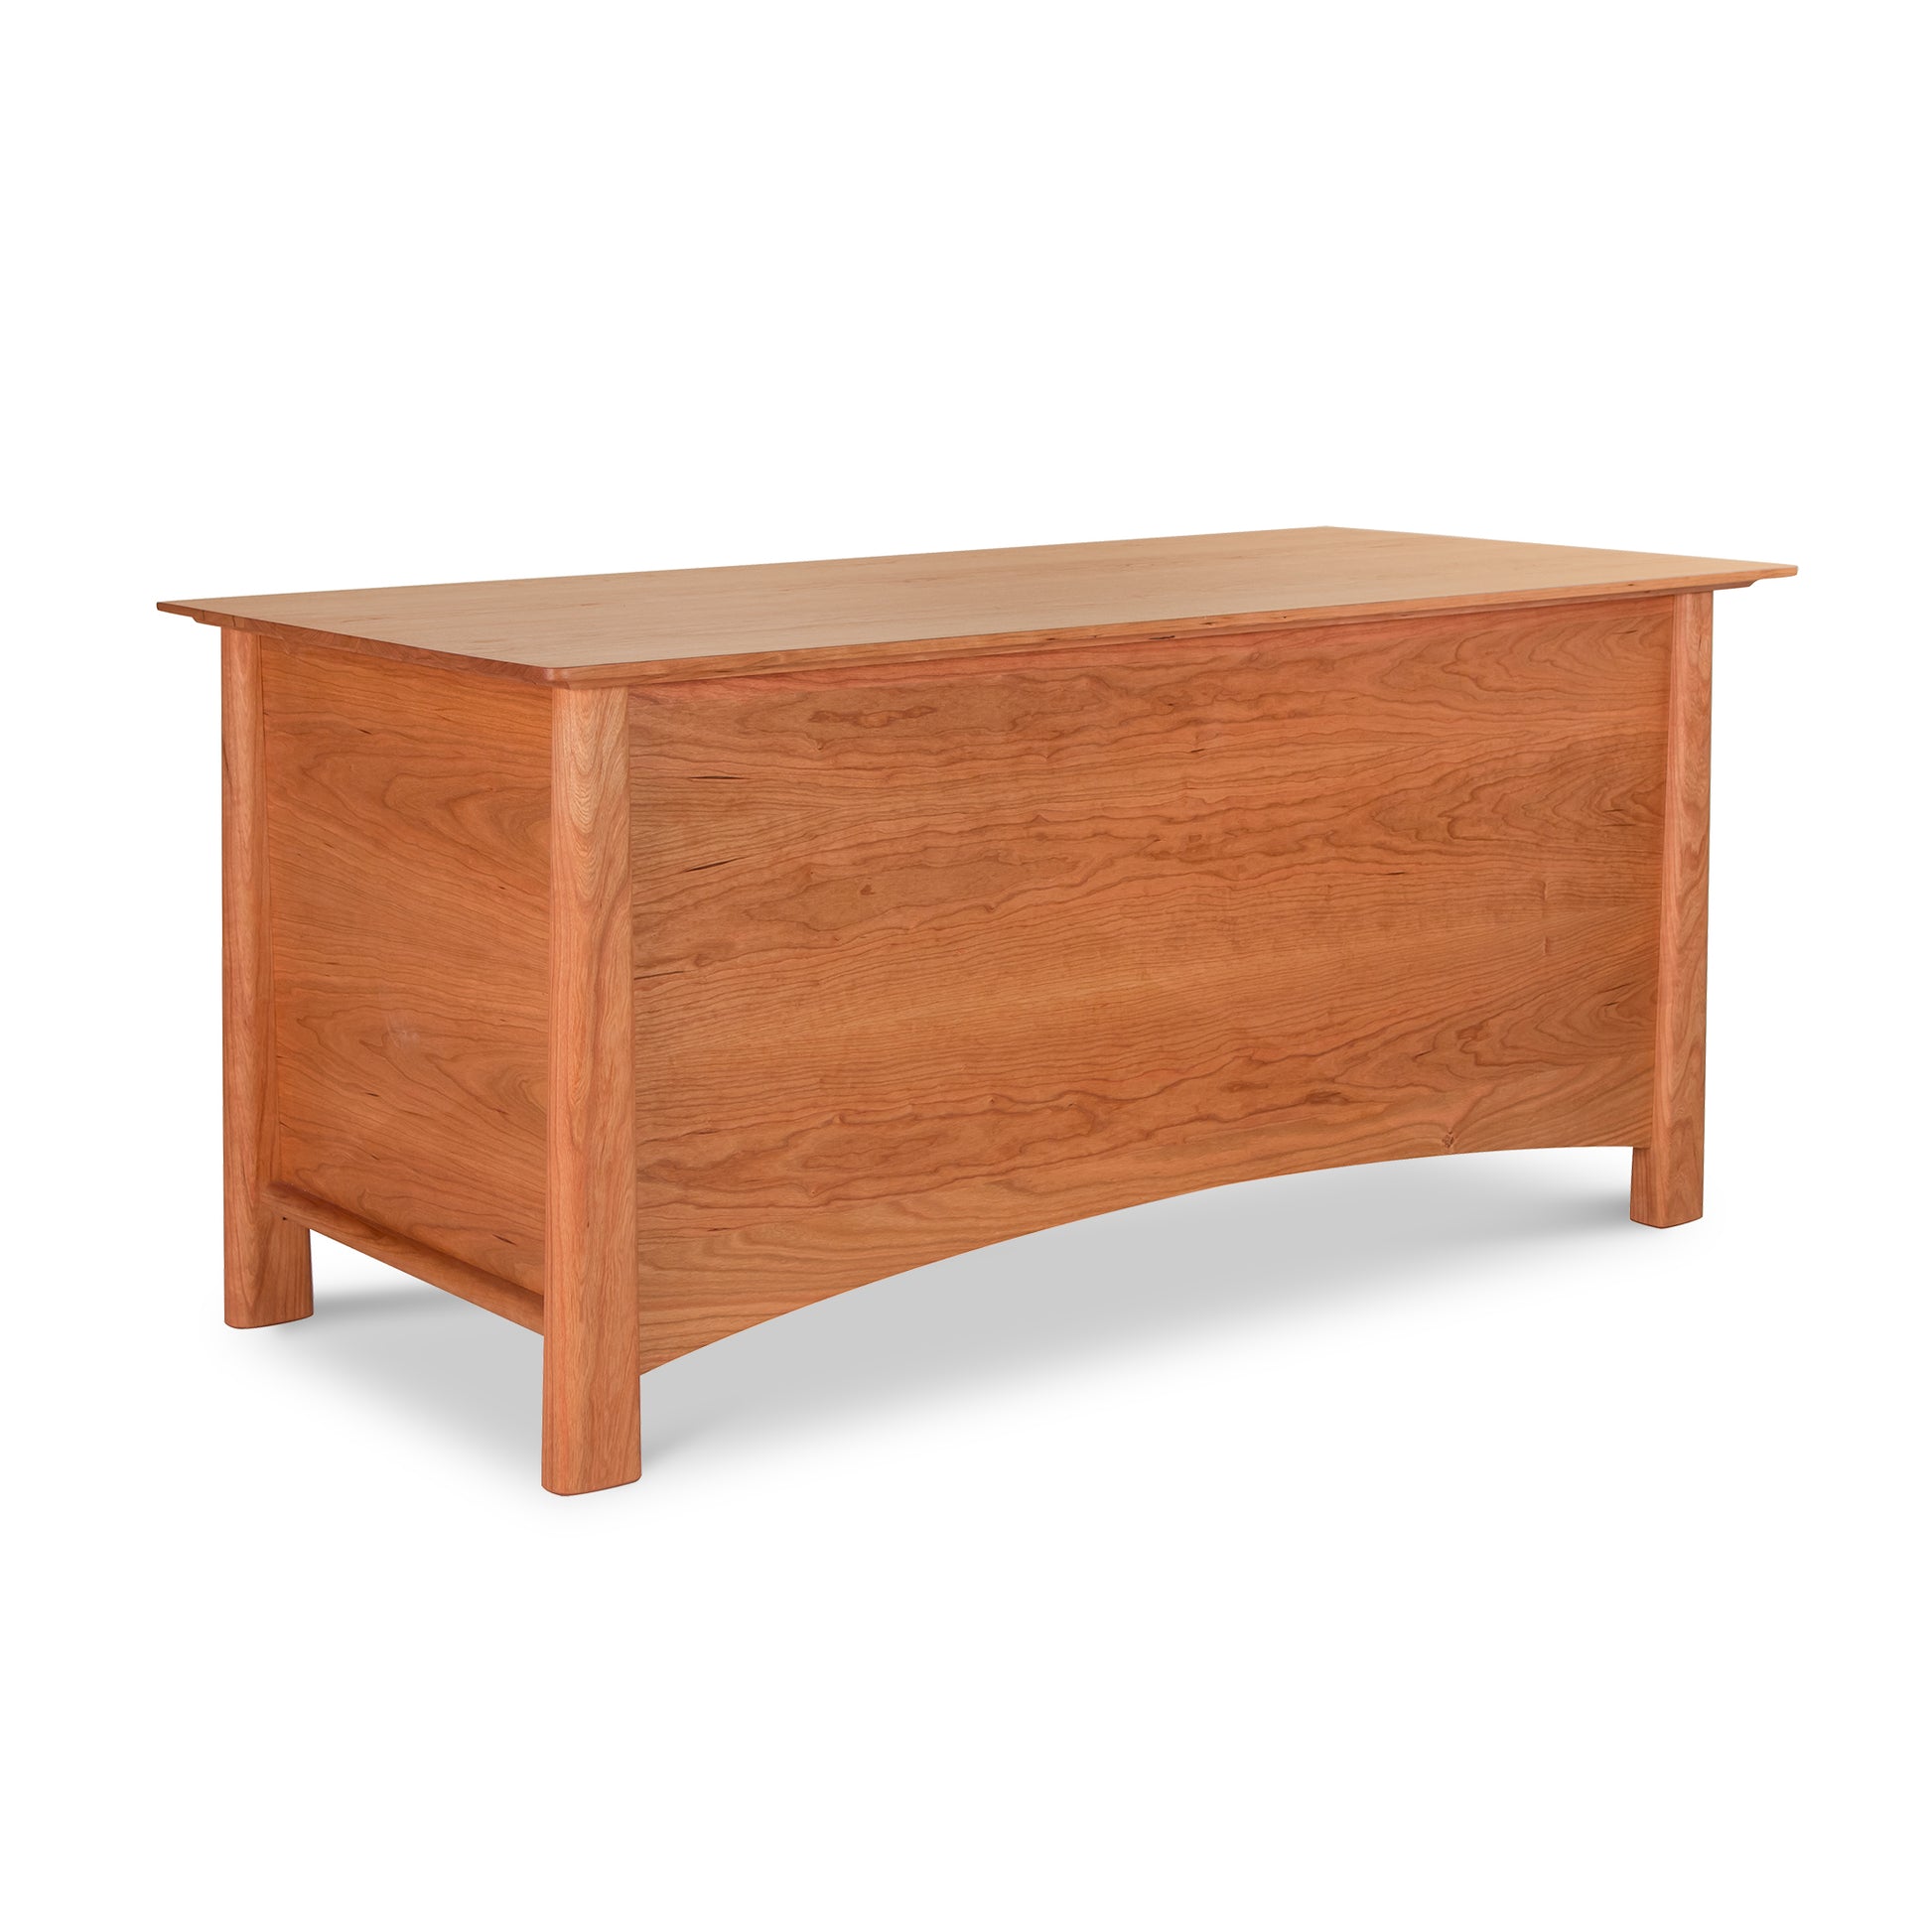 Maple Corner Woodworks Cherry Moon Blanket Chest, a Vermont craftsmanship wooden rectangular storage chest with a hinged top, isolated on a white background.